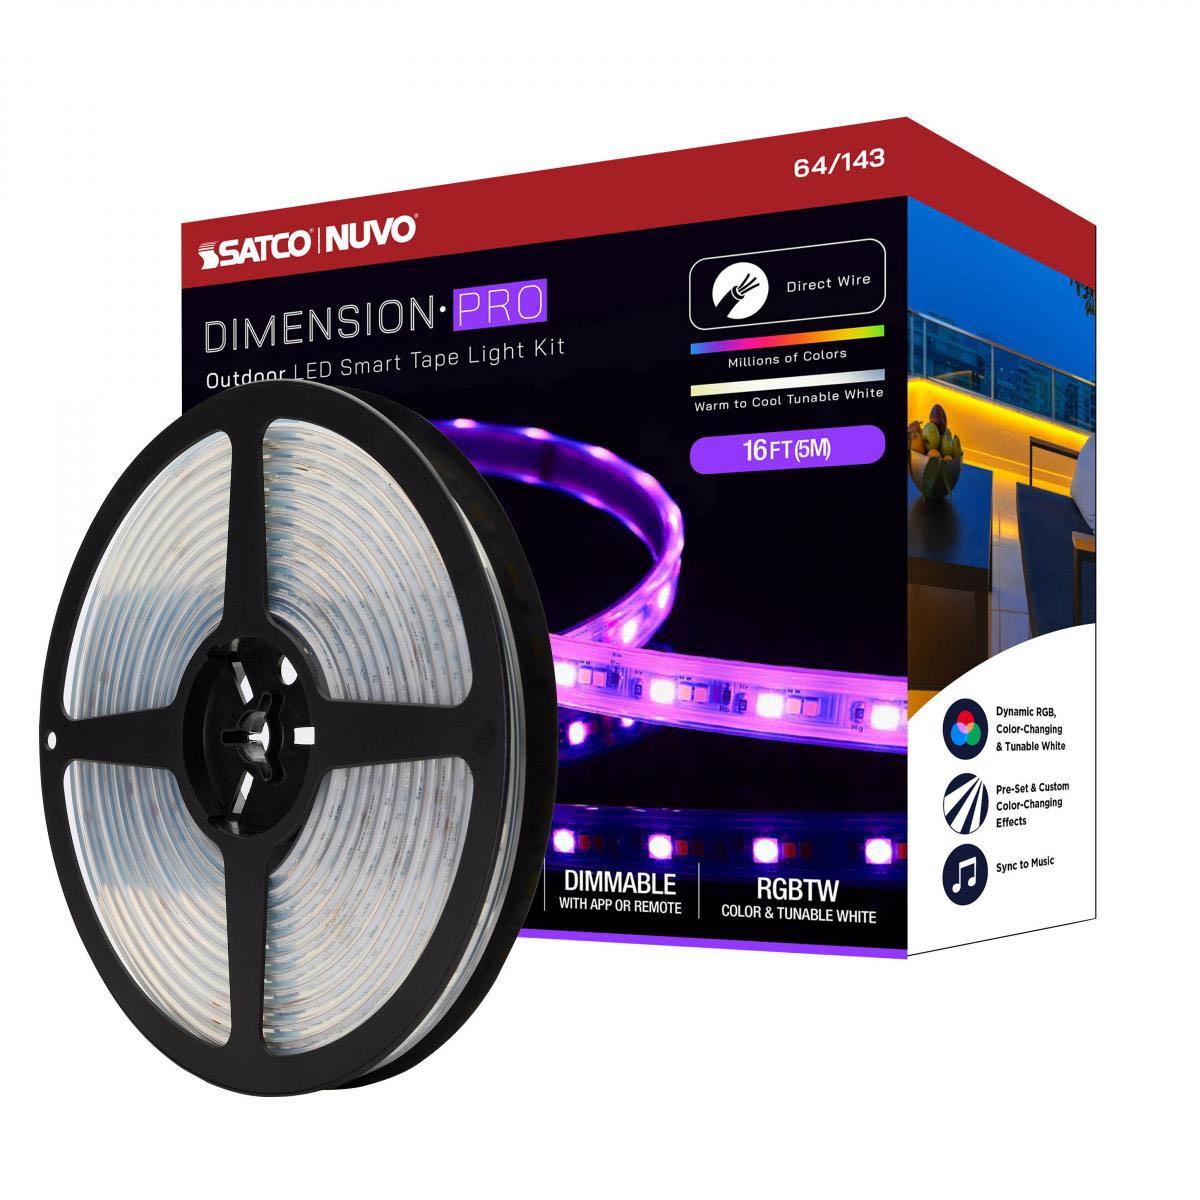 Dimension Pro Outdoor Smart LED Tape Light Kit with Remote, 16ft Reel, Color Changing RGB and Tunable White, 24V, J-Box Connection